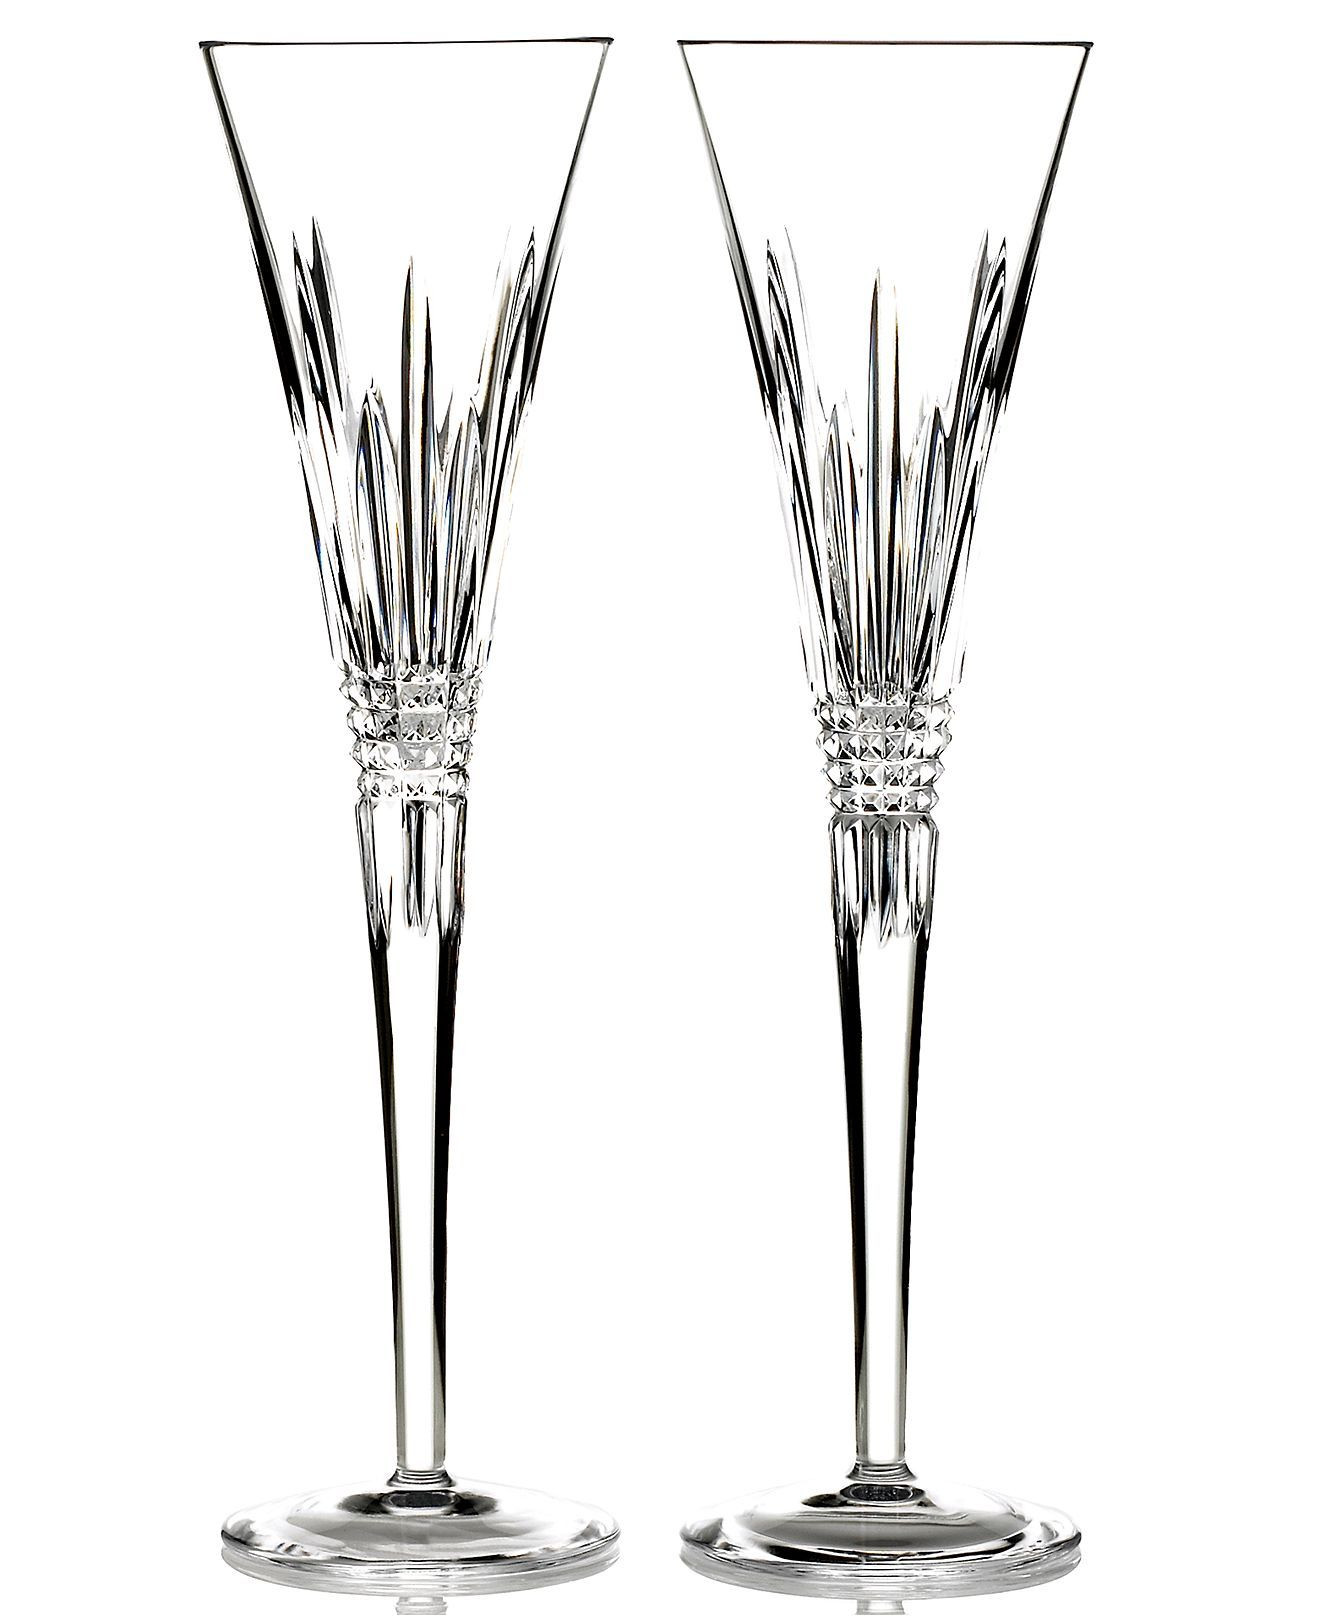 21 Ideal Mikasa Blossom Crystal Vase 2024 free download mikasa blossom crystal vase of waterford stemware lismore diamond toasting flutes set of 2 regarding waterford toasting flutes set of 2 lismore diamond collections for the home